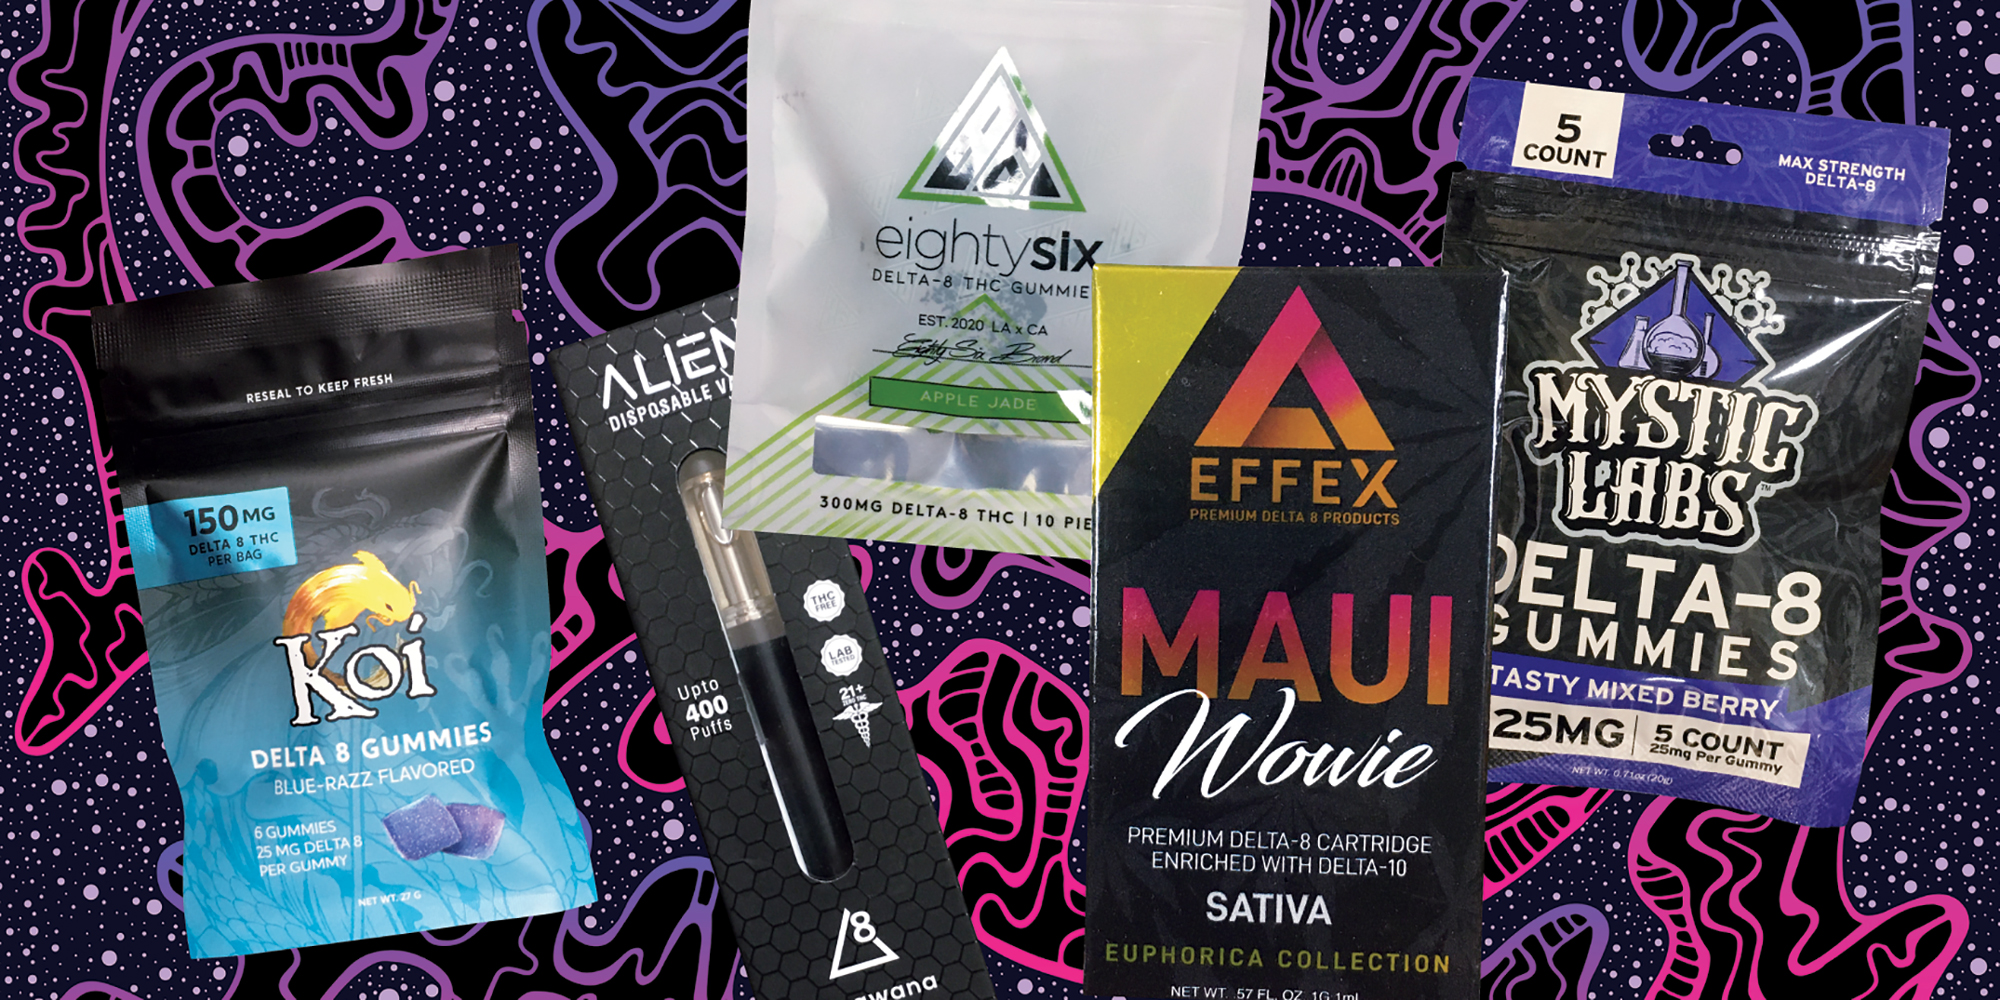 IS DELTA-8 K2 - Gummies|Thc|Products|Hemp|Product|Brand|Effects|Delta|Gummy|Cbd|Origin|Quality|Dosage|Delta-8|Dose|Usasource|Flavors|Brands|Ingredients|Range|Customers|Edibles|Cartridges|Reviews|Side|List|Health|Cannabis|Lab|Customer|Options|Benefits|Overviewproducts|Research|Time|Market|Drug|Farms|Party|People|Delta-8 Thc|Delta-8 Products|Delta-9 Thc|Delta-8 Gummies|Delta-8 Thc Products|Delta-8 Brands|Customer Reviews|Brand Overviewproducts|Drug Tests|Free Shipping|Similar Benefits|Vape Cartridges|Hemp Doctor|United States|Third Party Lab|Drug Test|Thc Edibles|Health Canada|Cannabis Plant|Side Effects|Organic Hemp|Diamond Cbd|Reaction Time|Legal Hemp|Psychoactive Effects|Psychoactive Properties|Third Party|Dry Eyes|Delta-8 Market|Tolerance Level